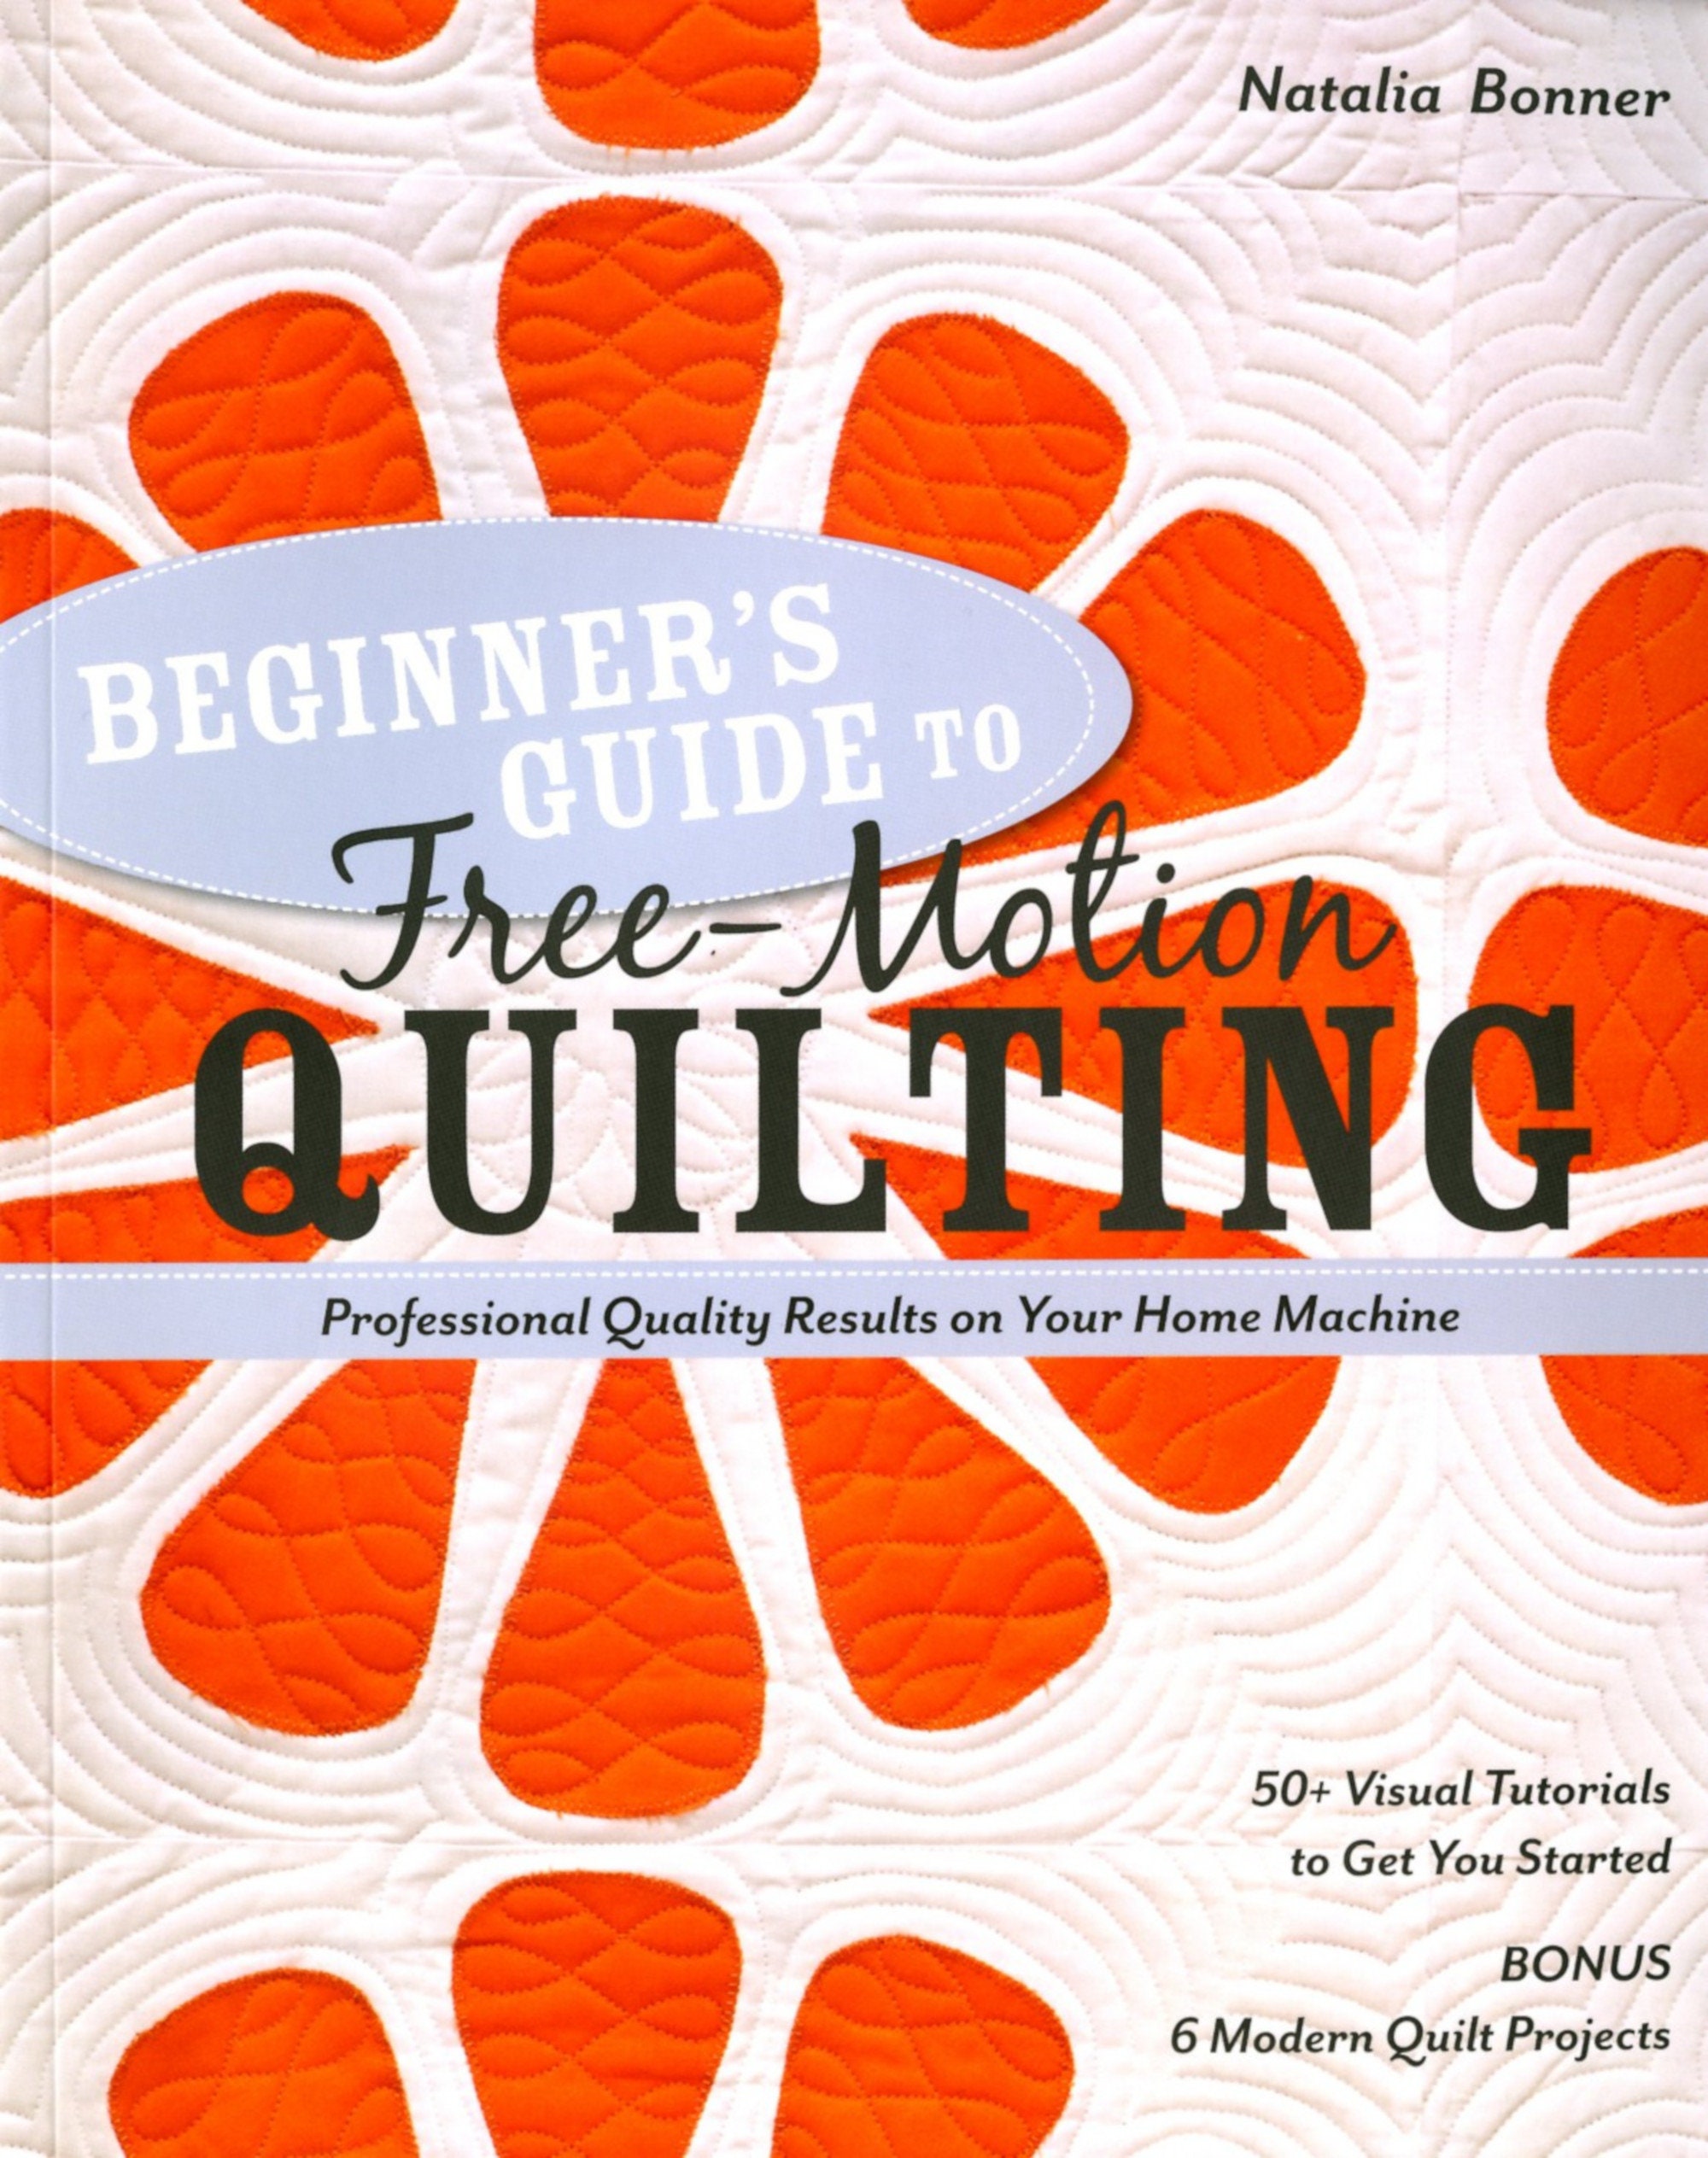 Guide to the Best Quilt Batting - Thread Sketching in Action